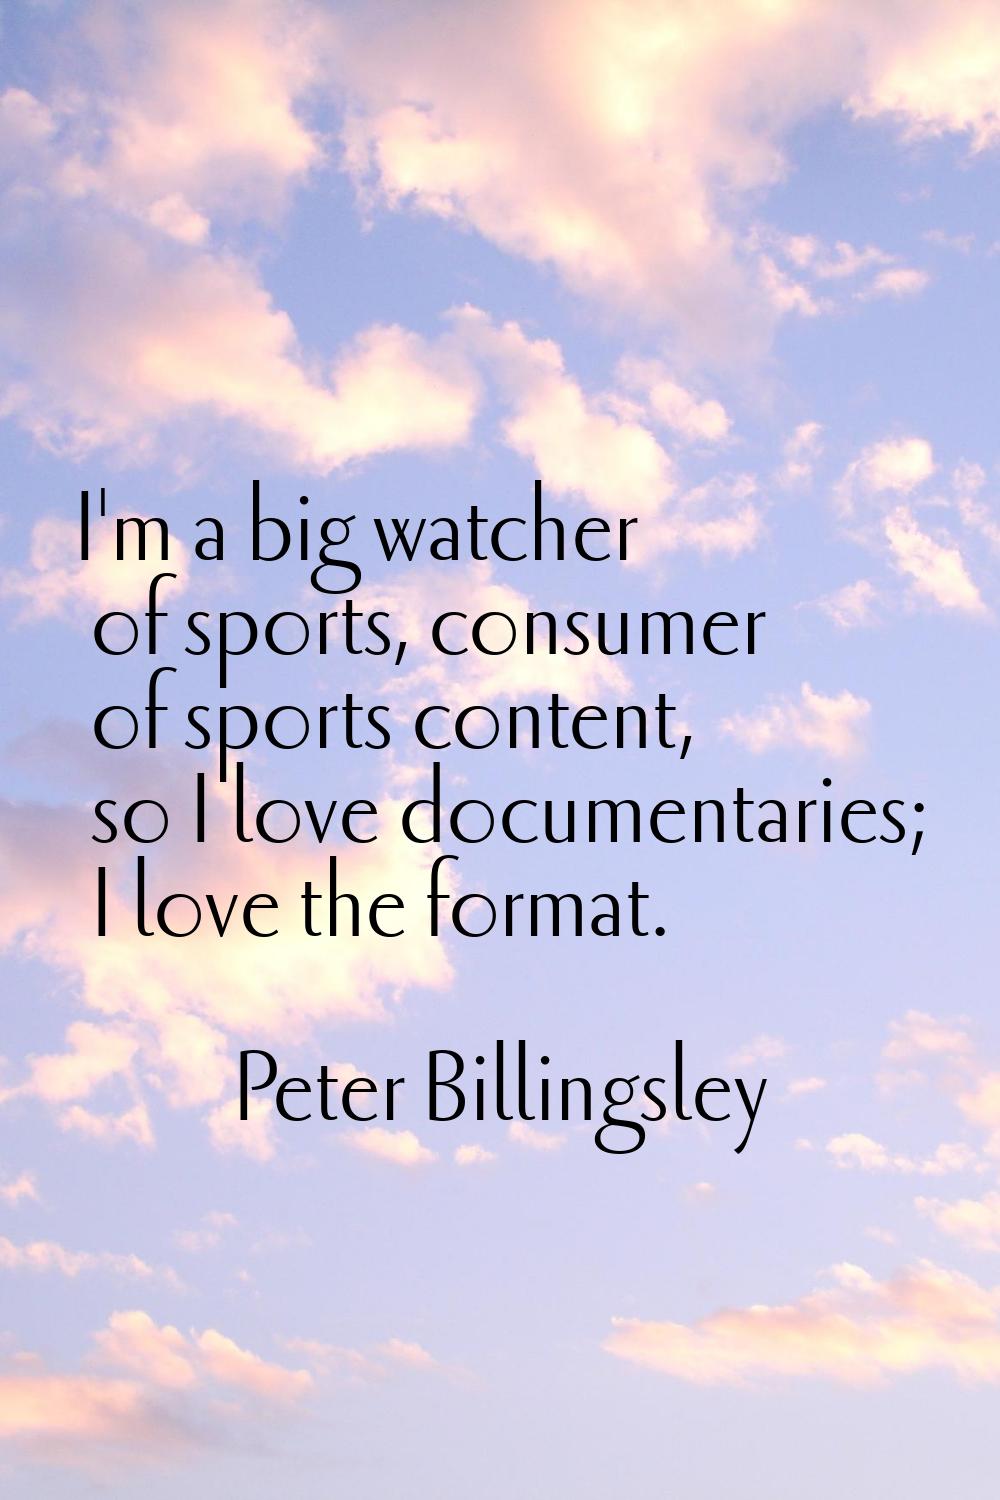 I'm a big watcher of sports, consumer of sports content, so I love documentaries; I love the format